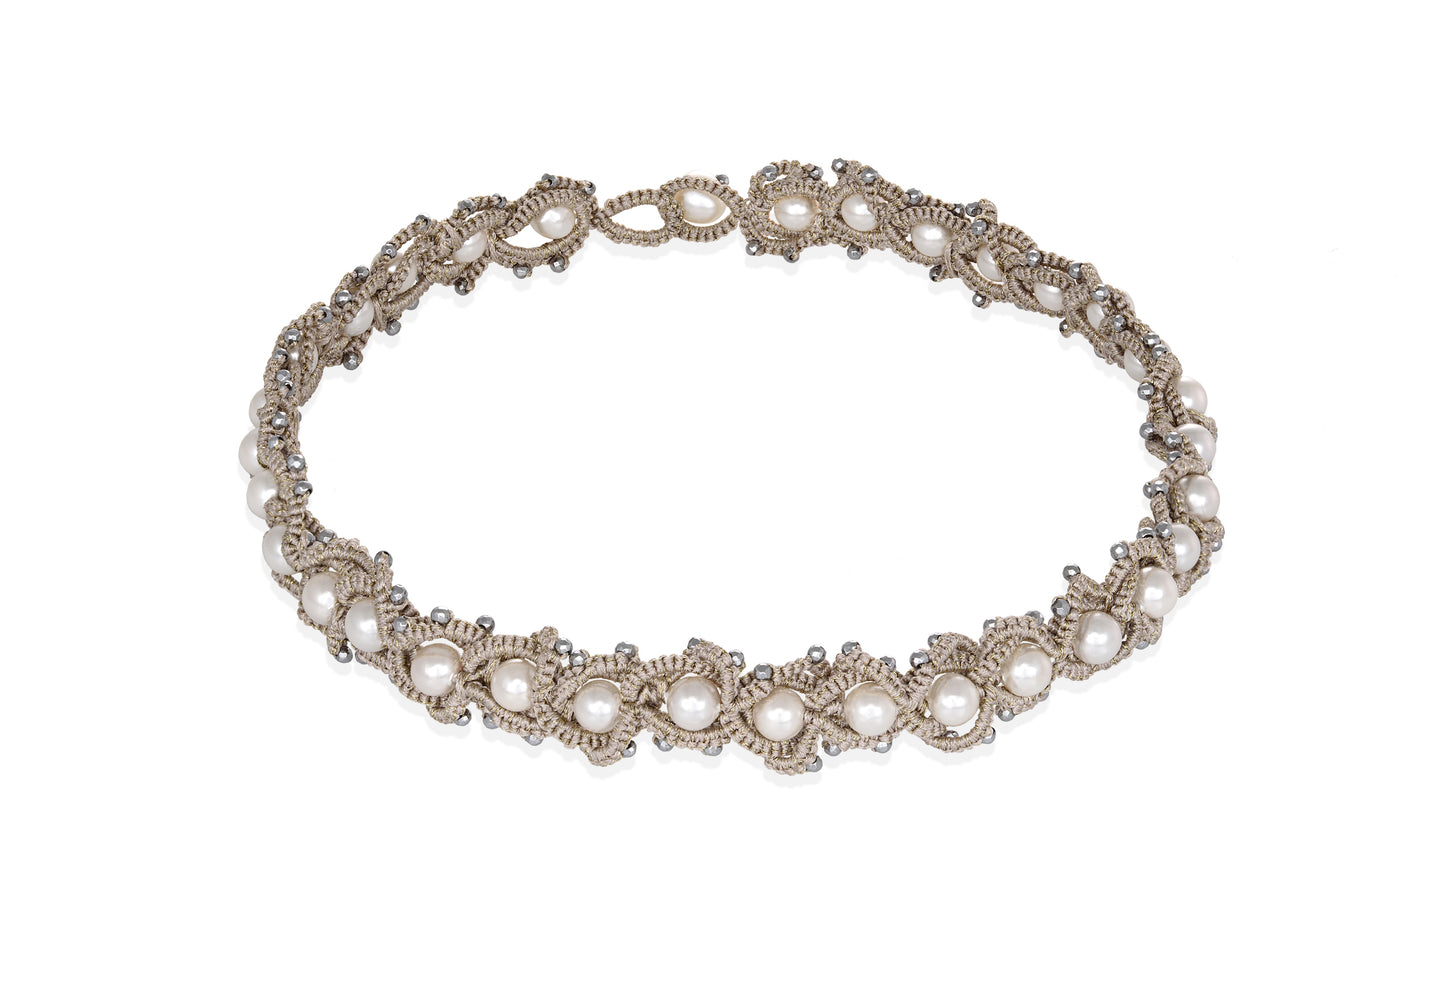 Ocean chic lace choker, sand silver